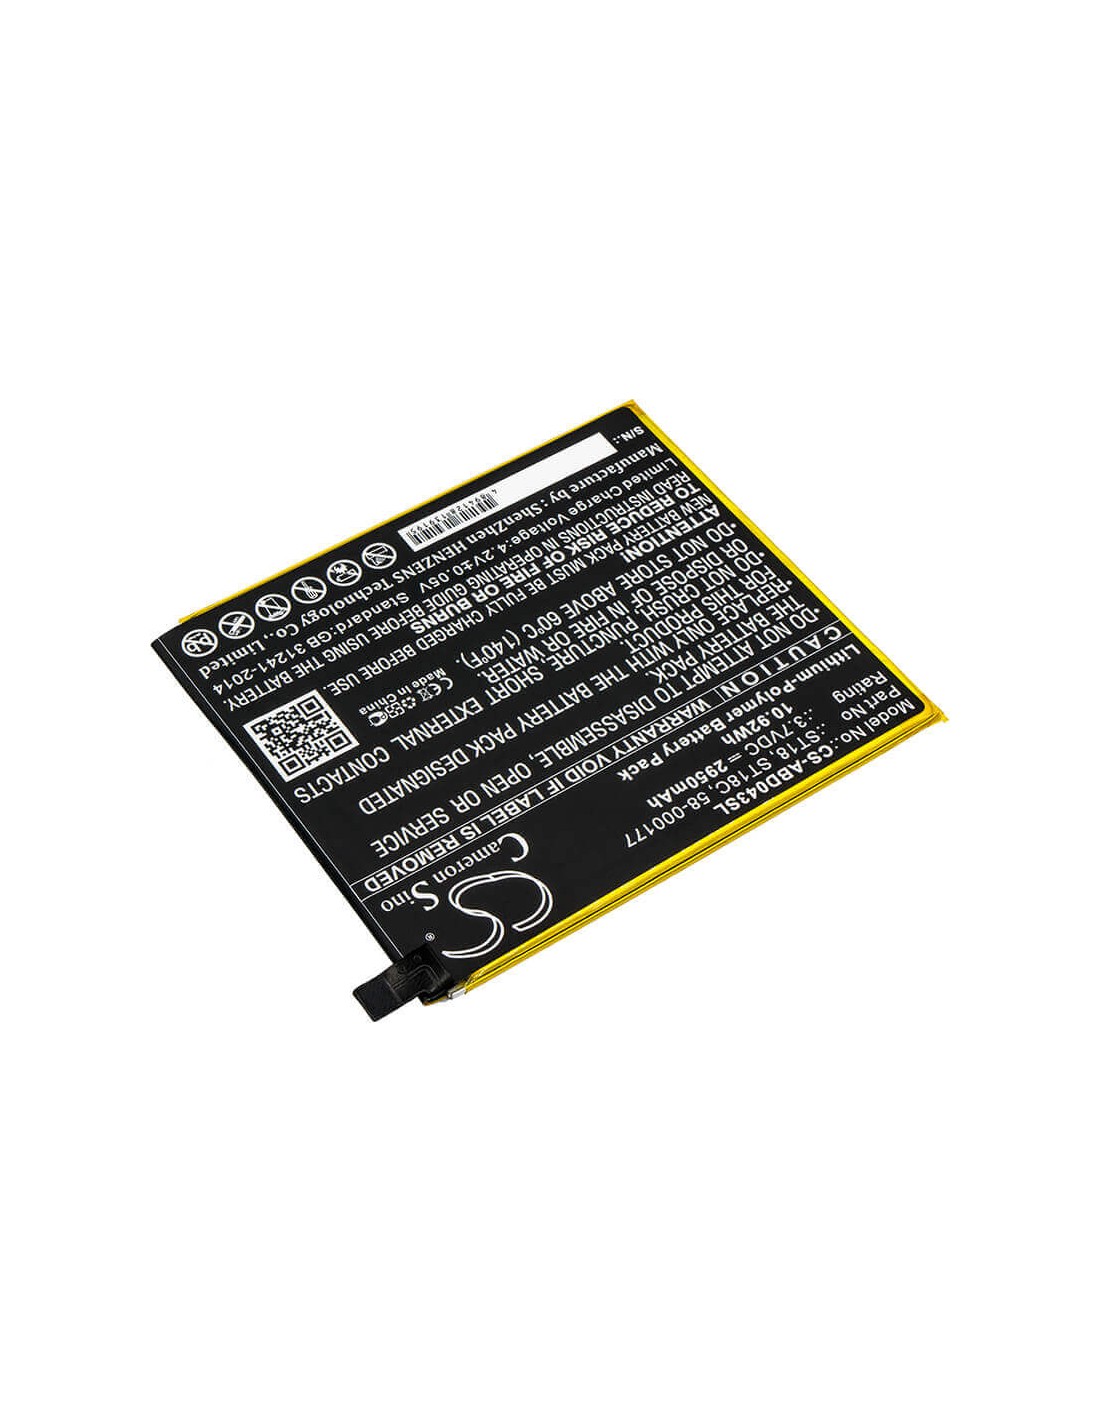 Battery for Amazon, B01GEW27DA, Kindle Fire 7"' Kindle Fire 7th Generation 2017 3.7V, 2950mAh - 10.92Wh